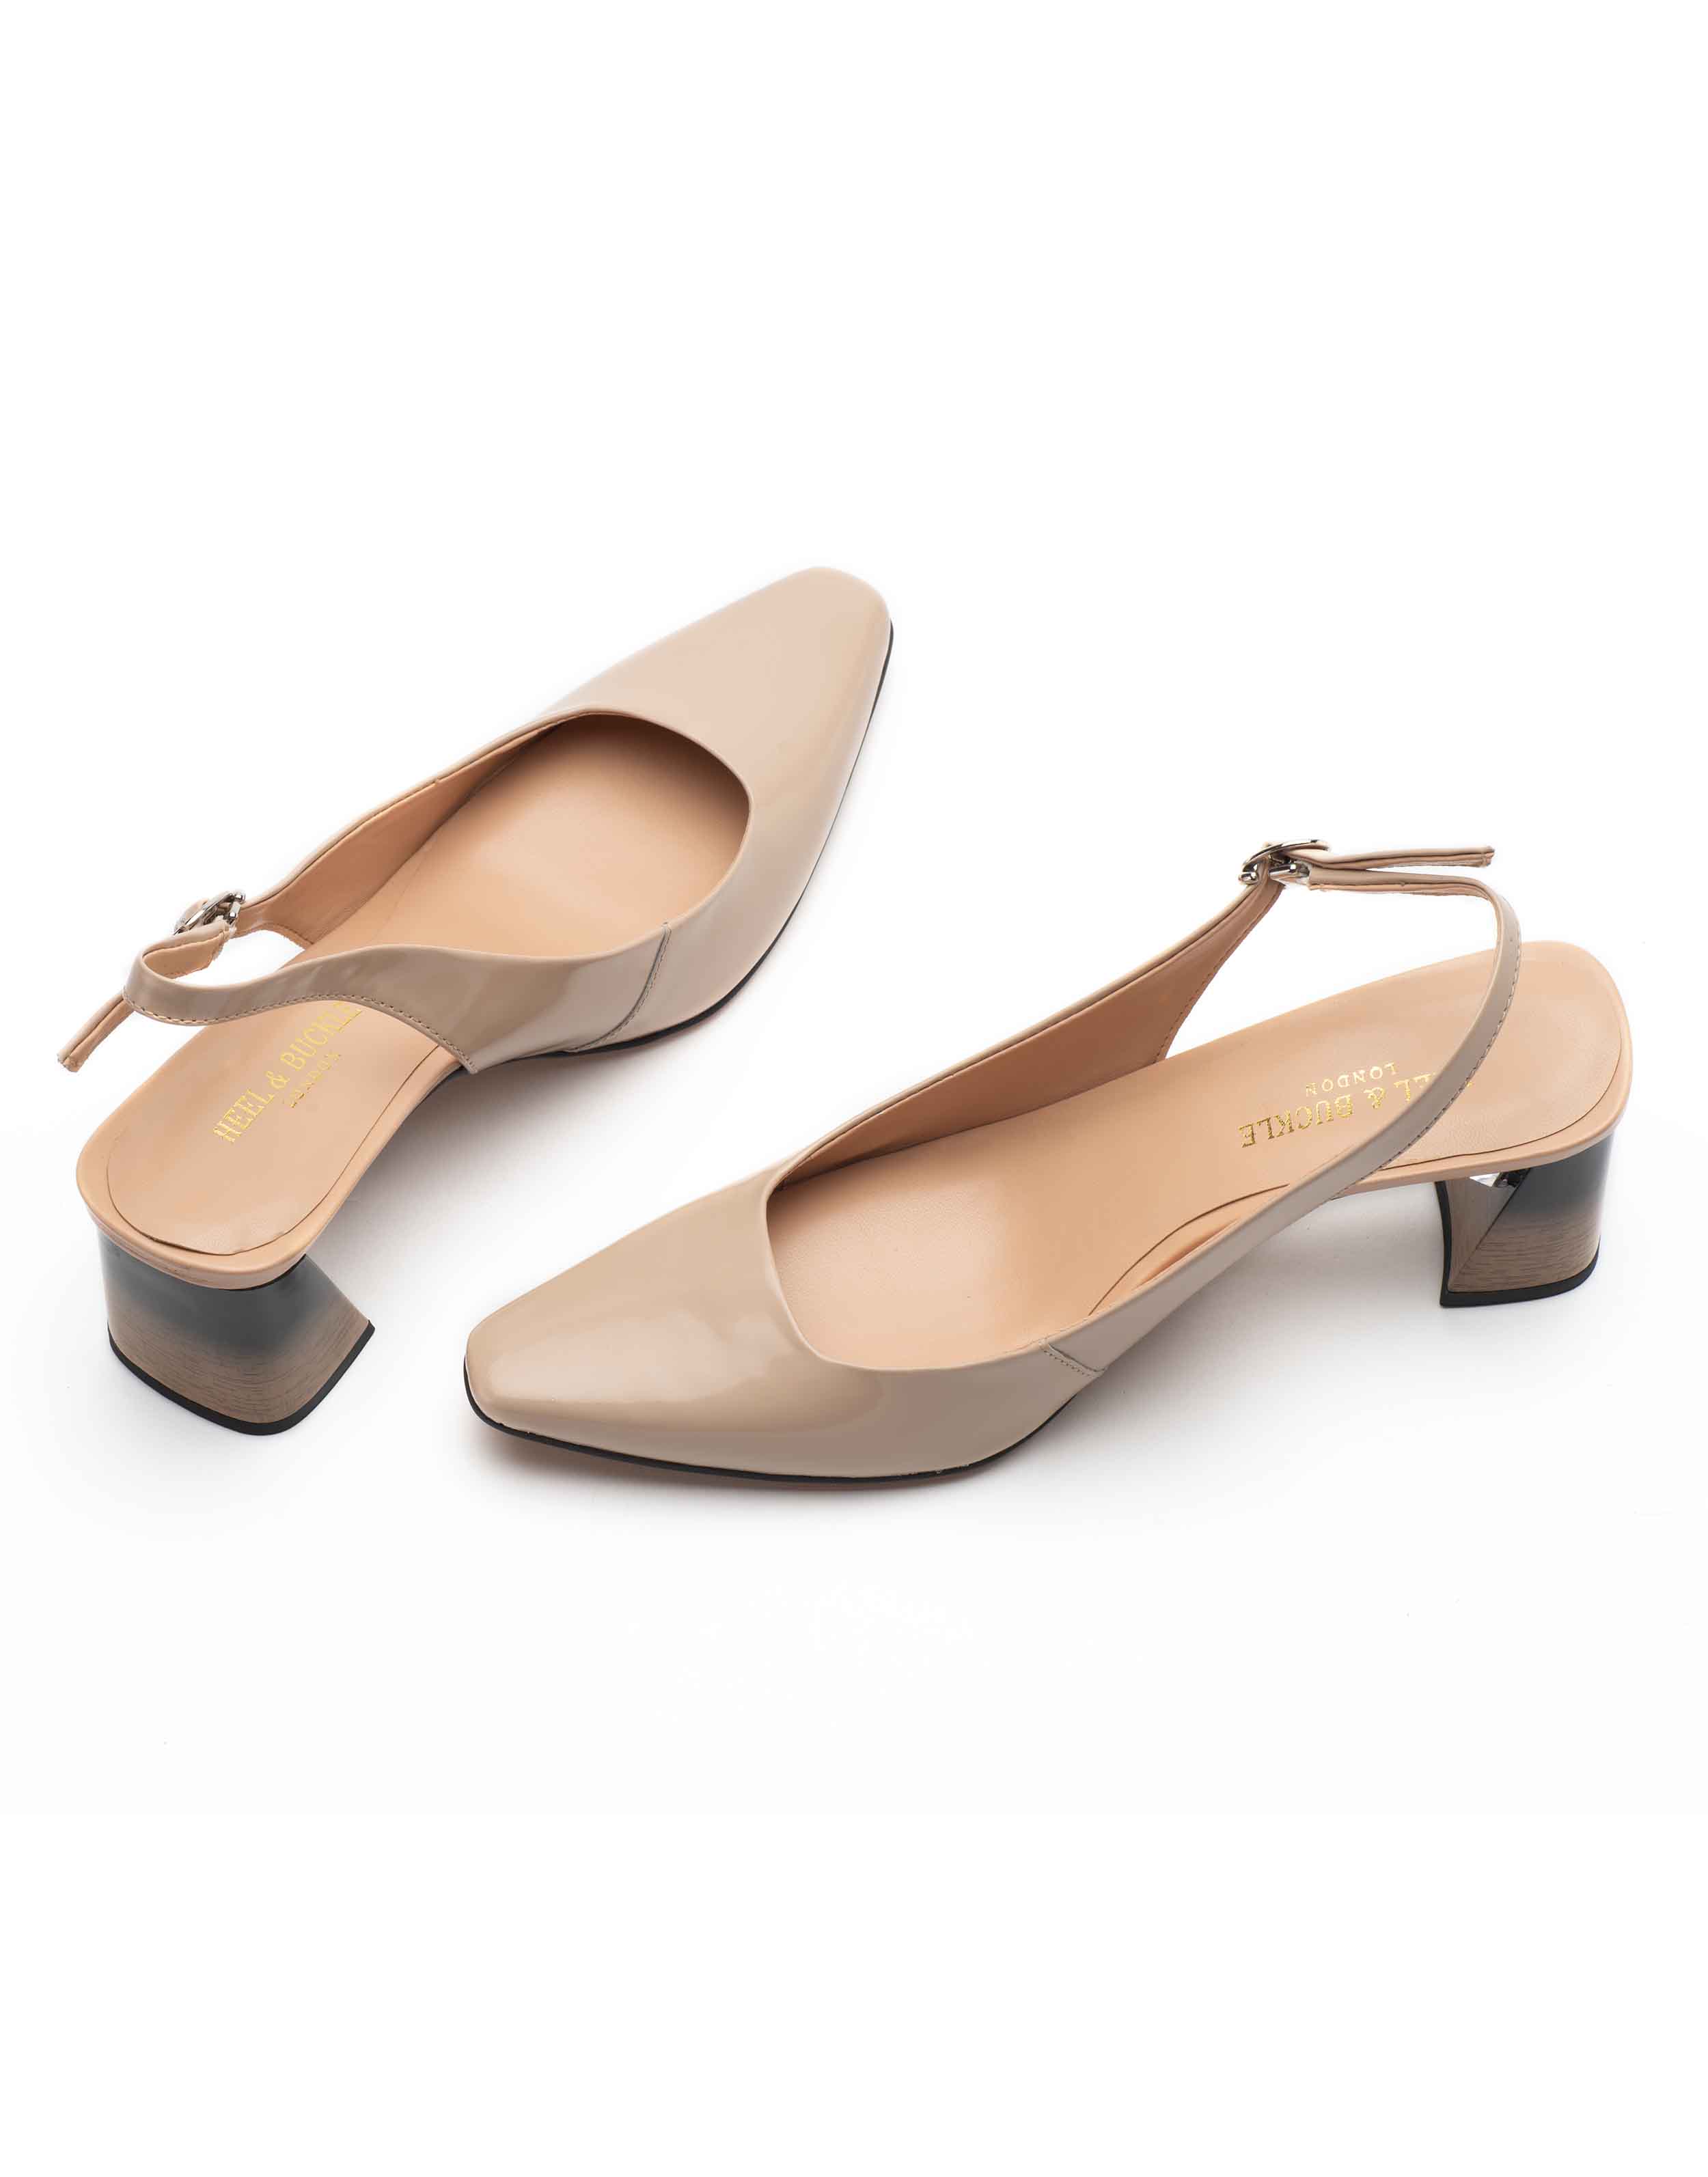 Leather Block Heel Pointed Slingback Shoes | Dune London | M&S